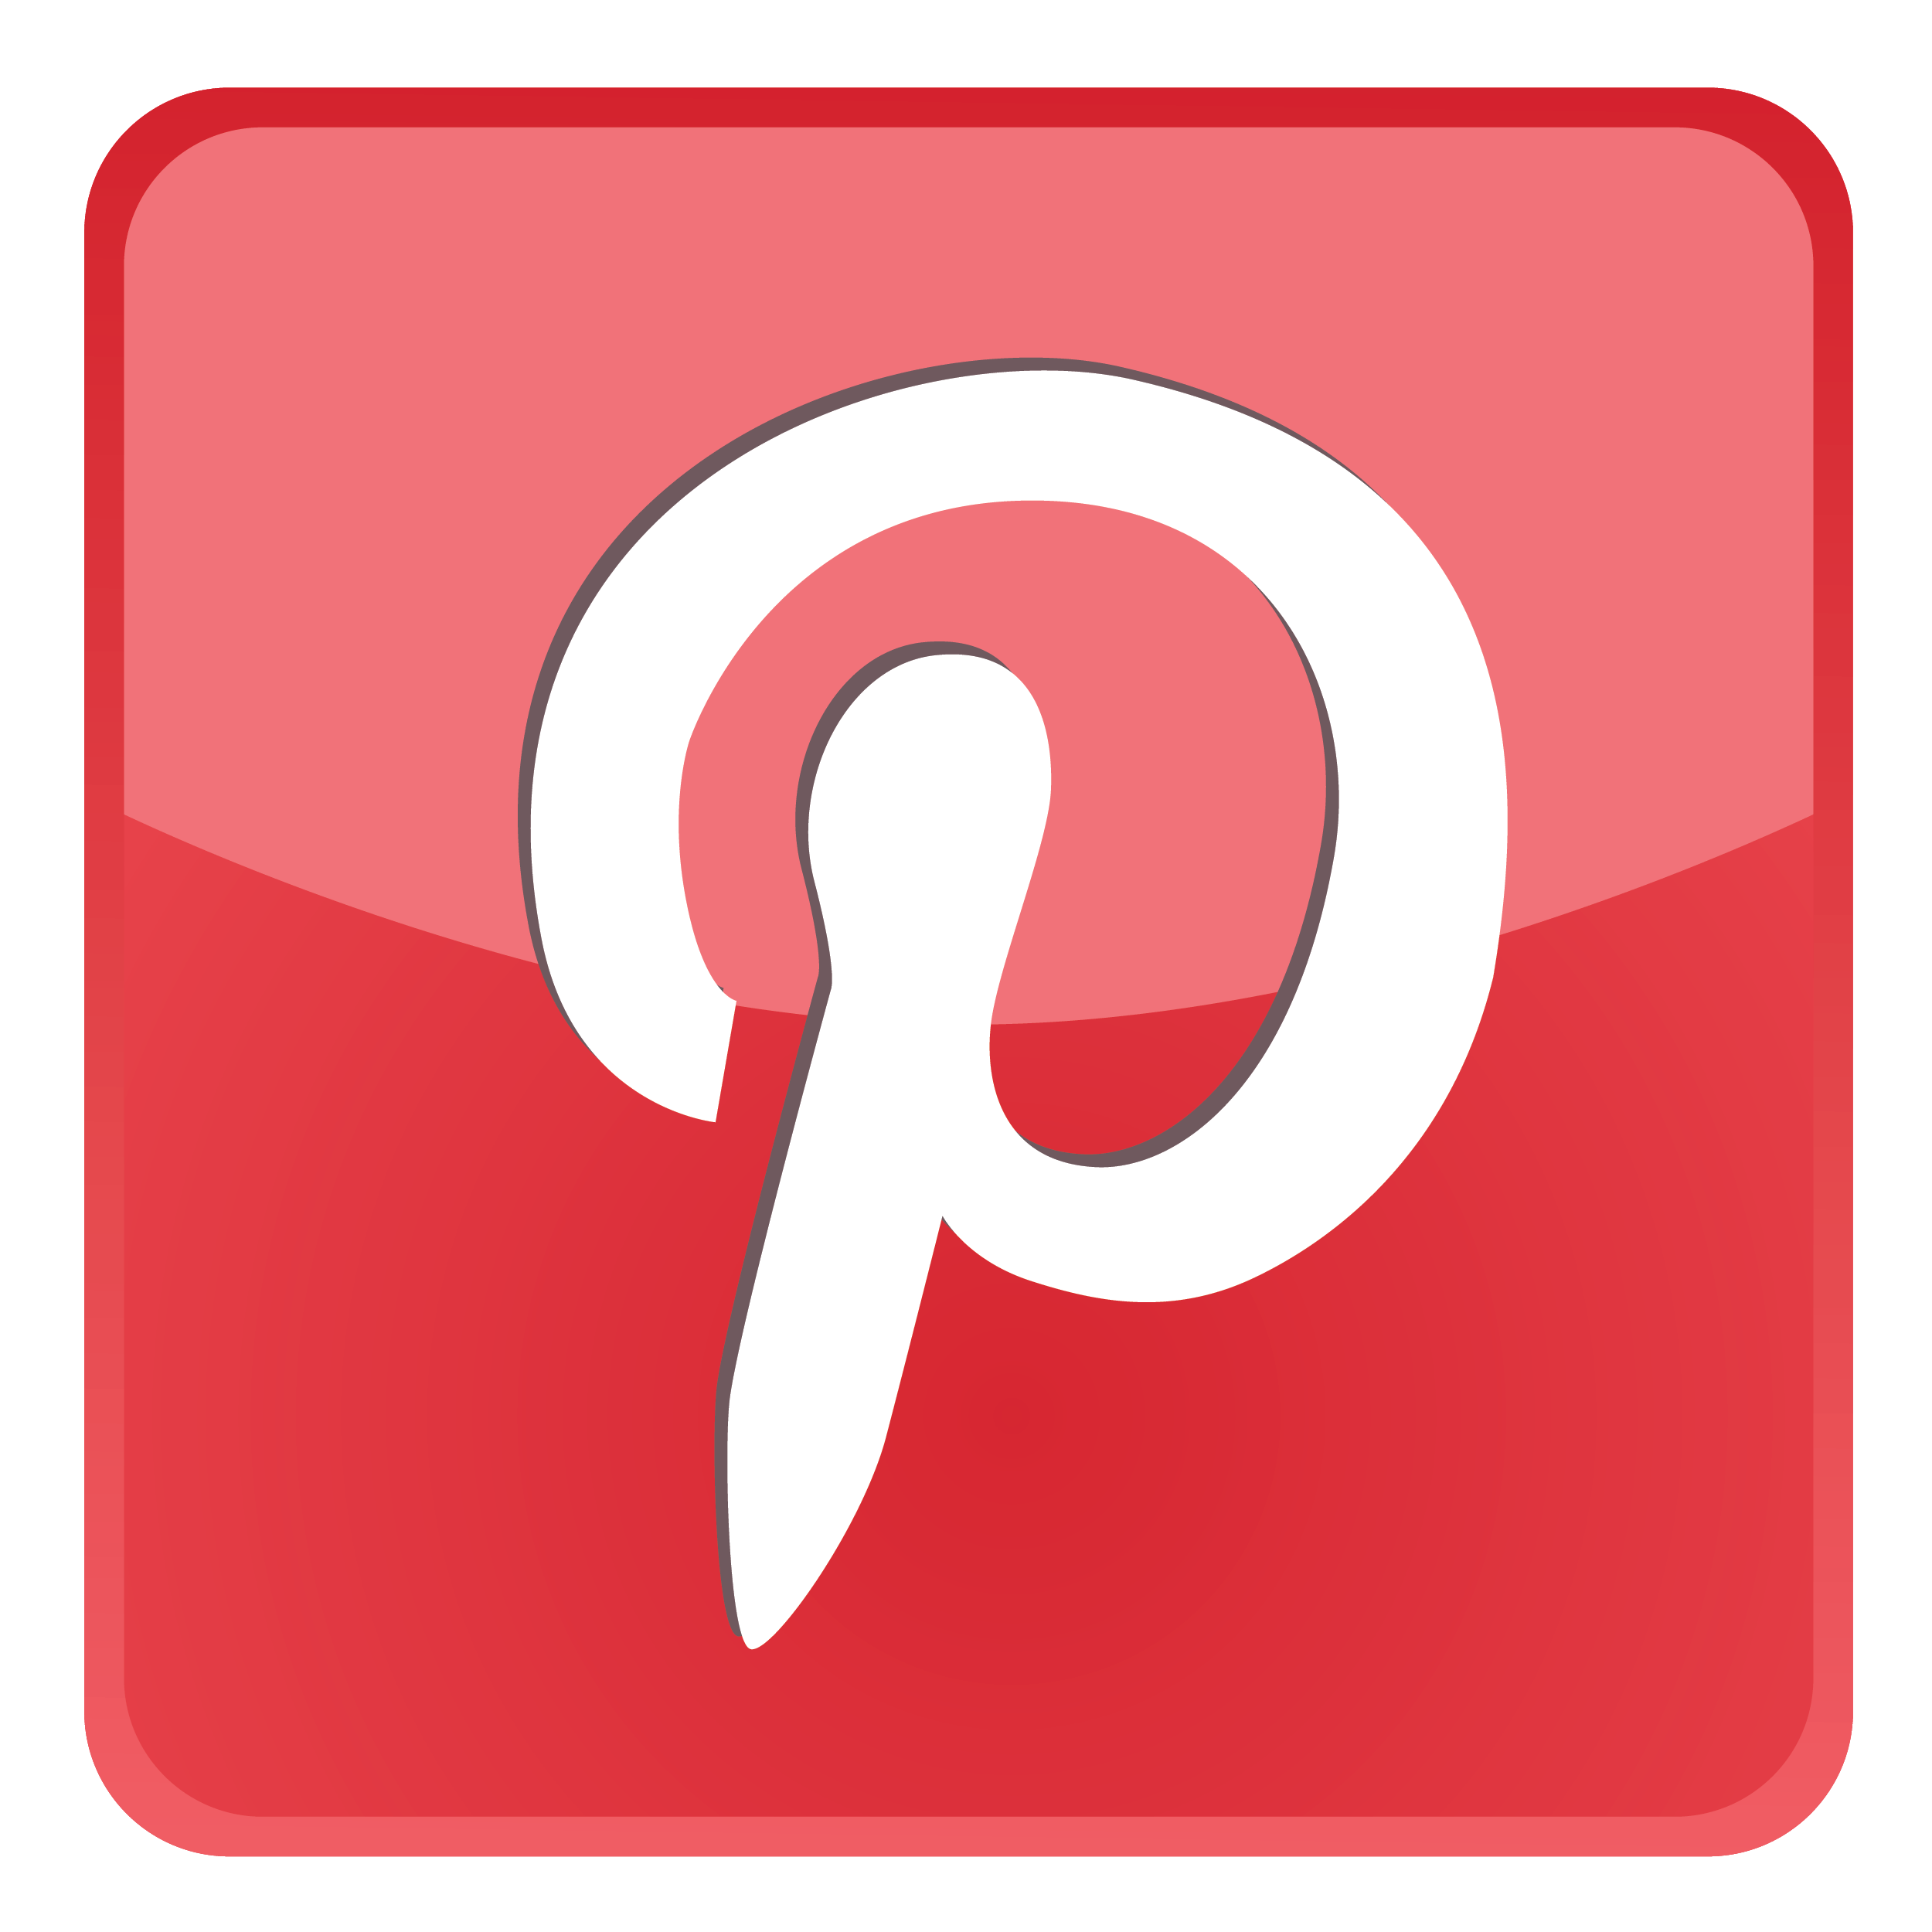 Pinterest Logo - Pinterest Logo Png #3181 - Free Icons and PNG Backgrounds